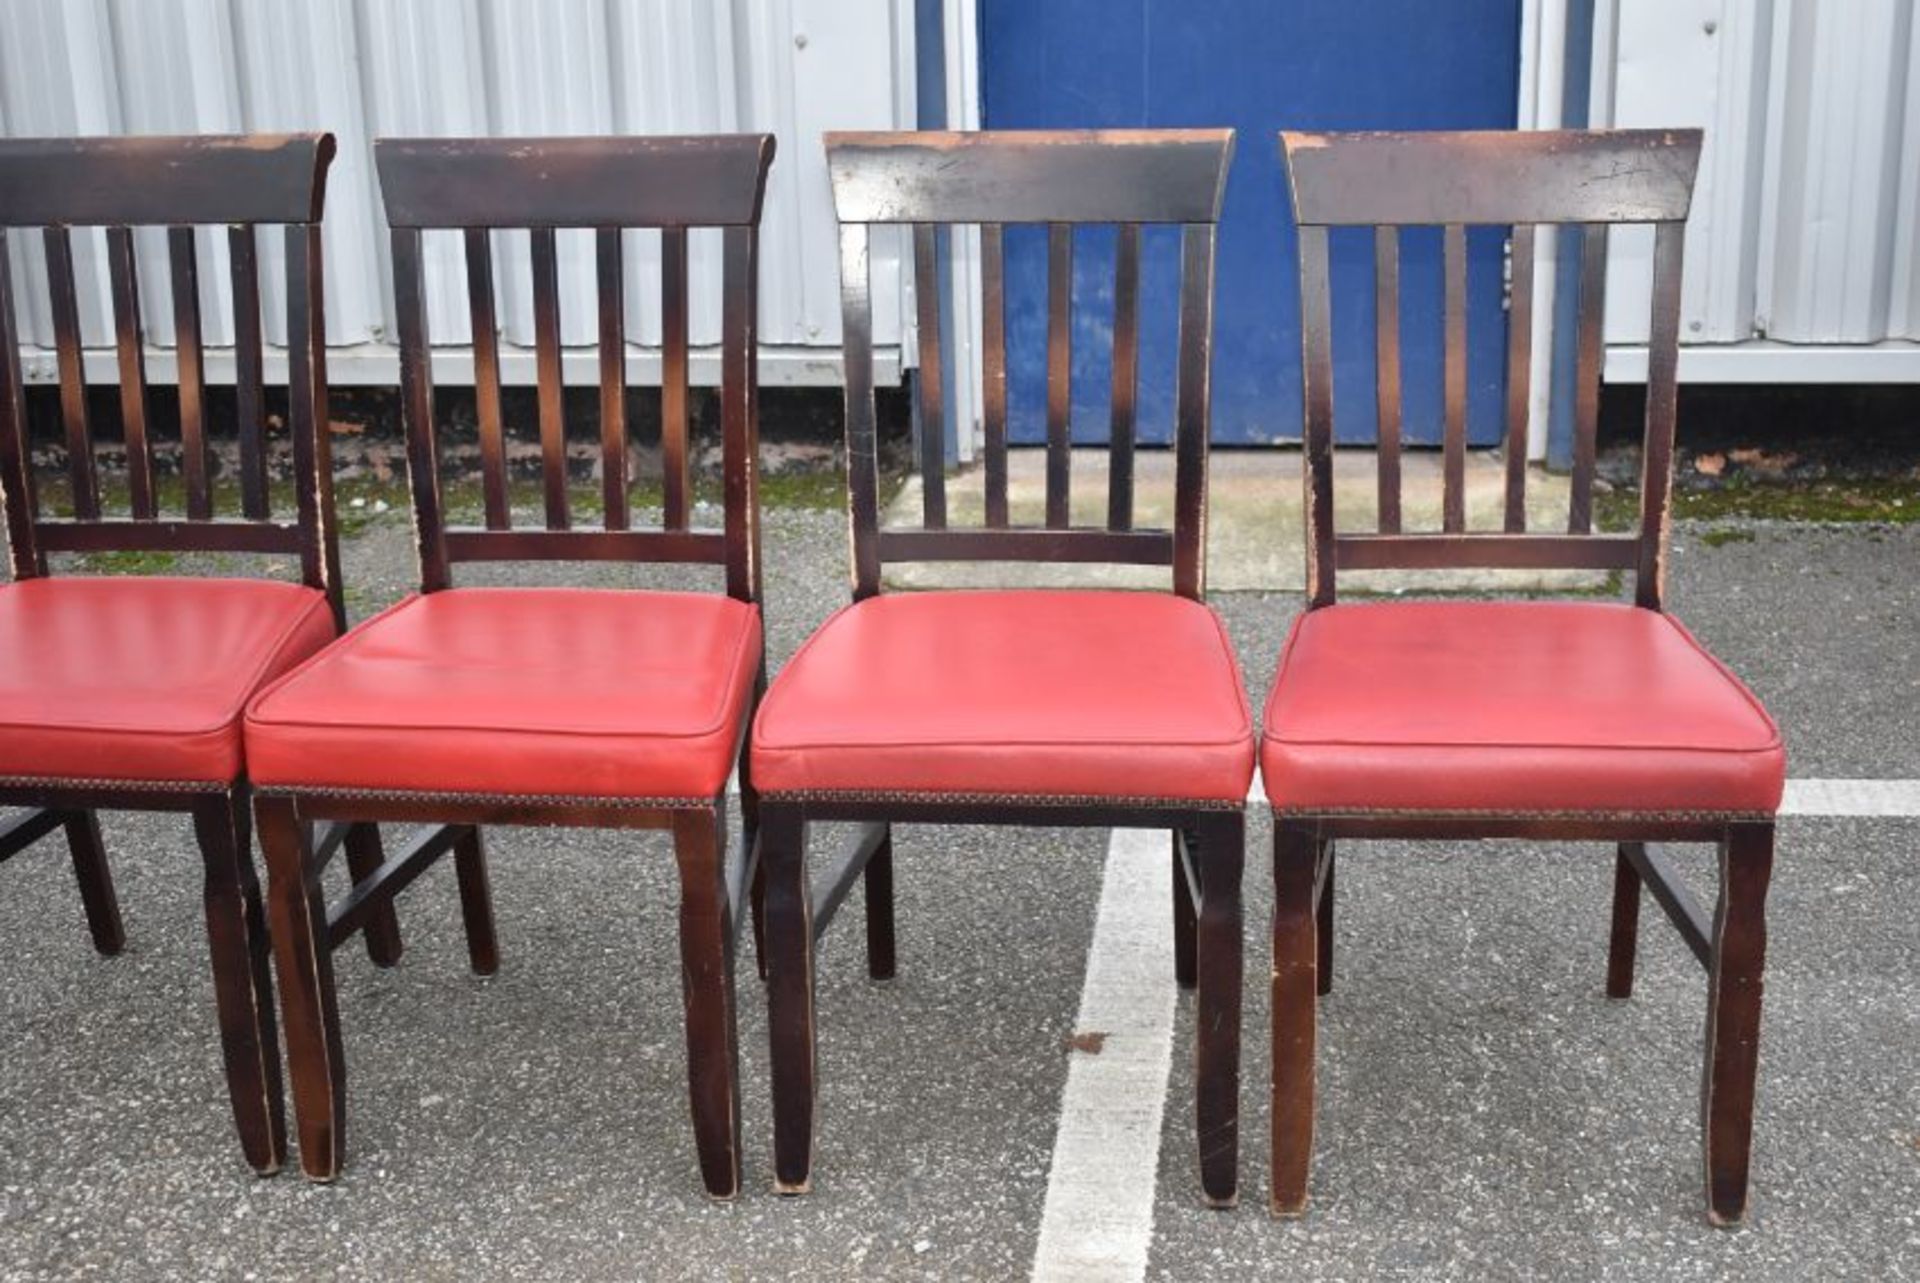 8 x Restaurant Dining Chairs With Dark Stained Wood Finish and Red Leather Seat Pads - Recently Remo - Image 3 of 6